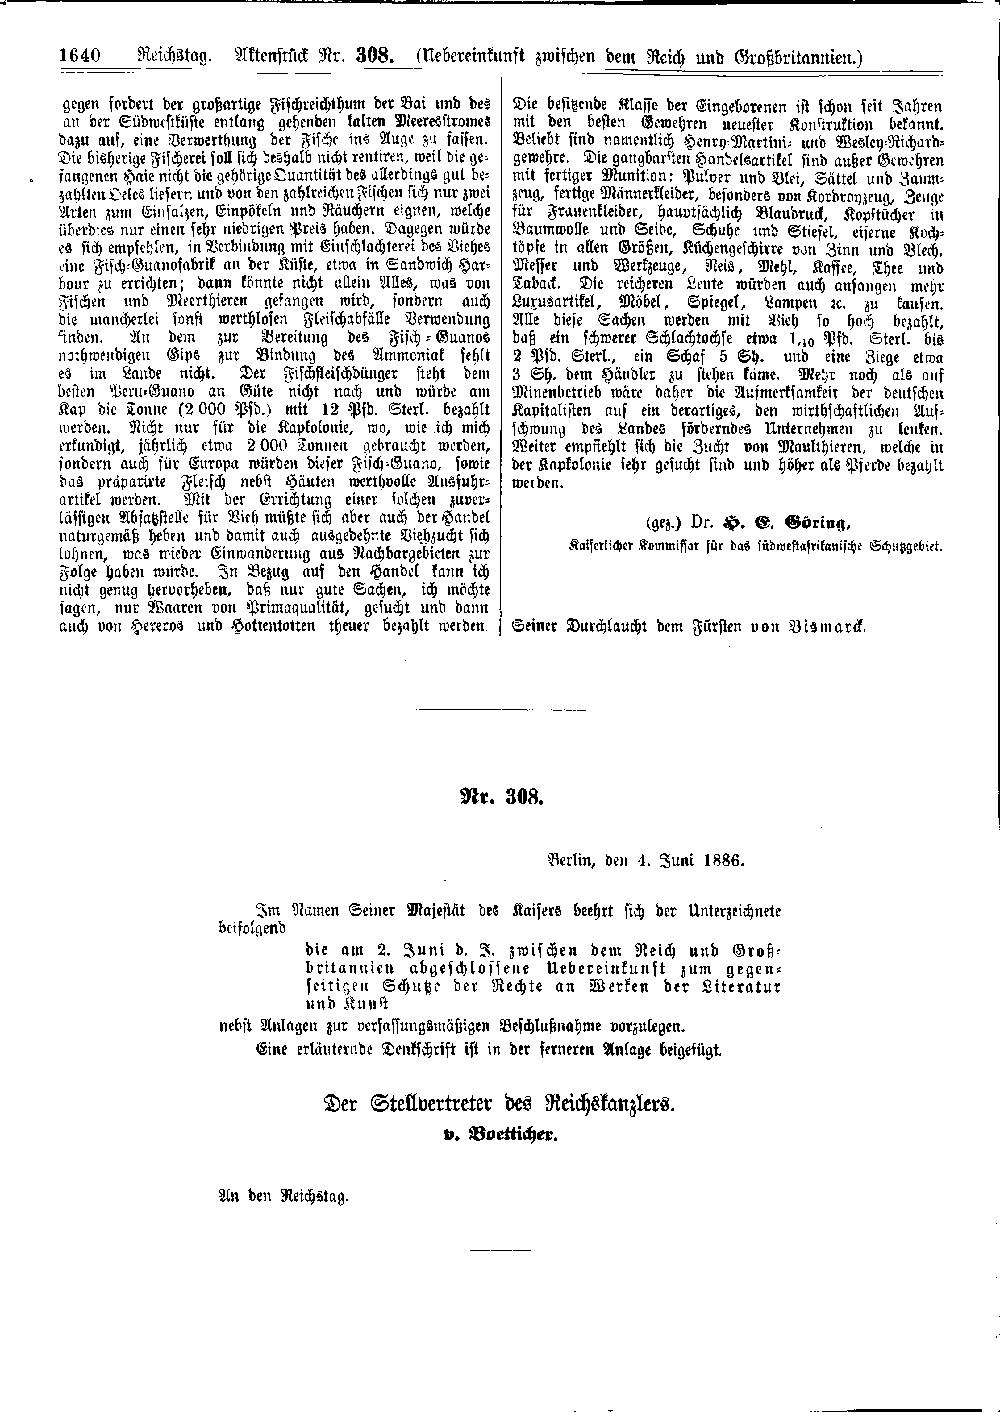 Scan of page 1640